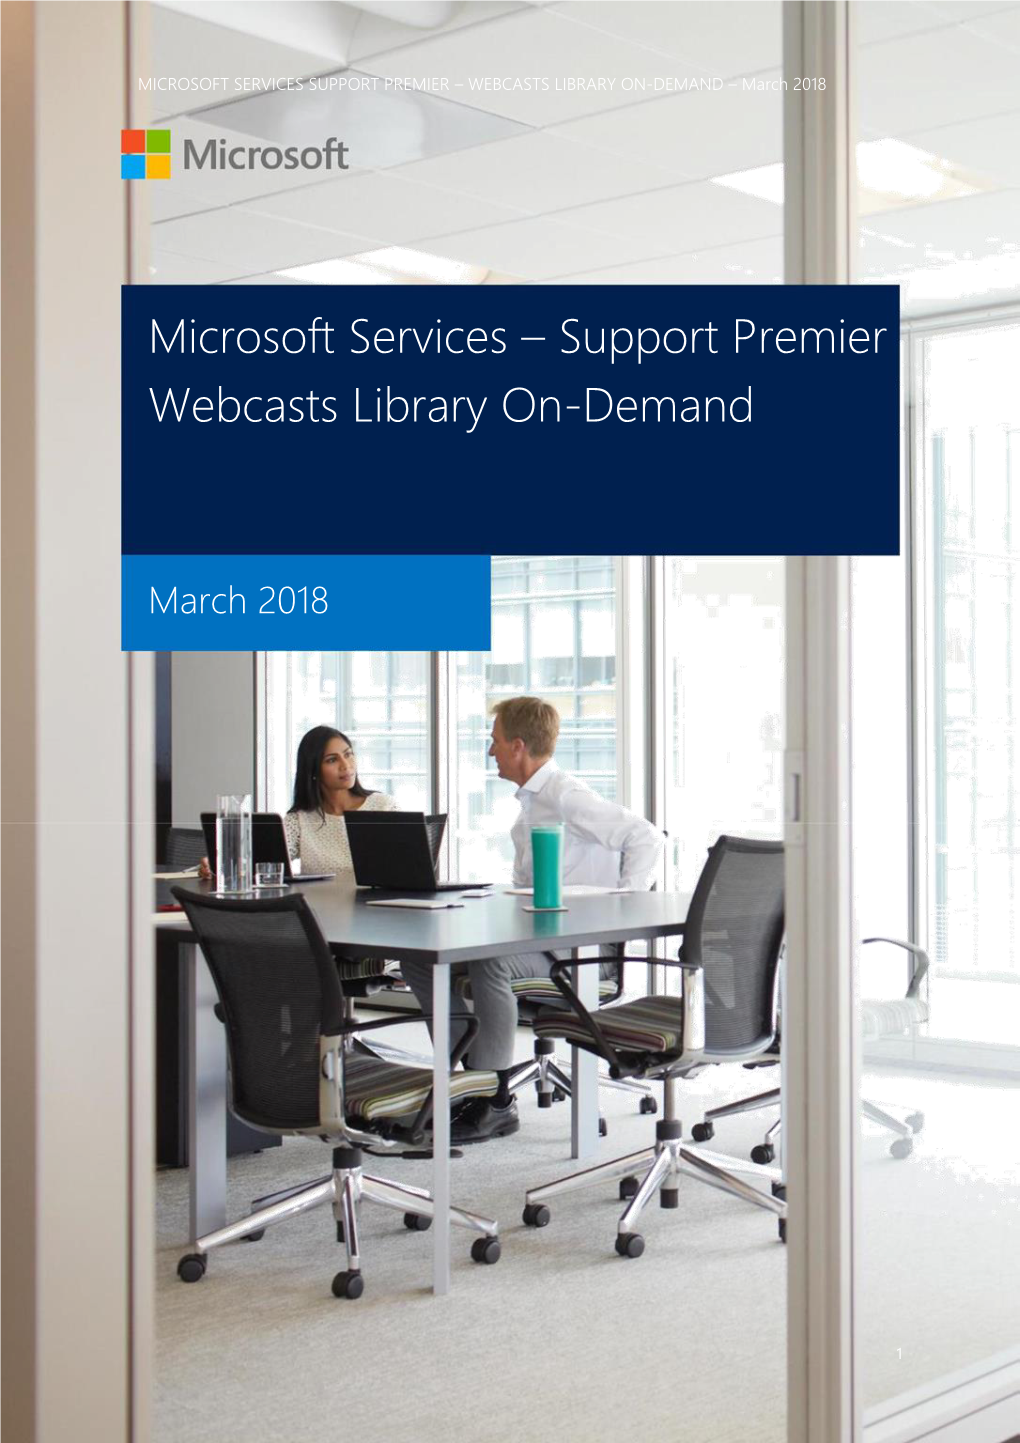 MICROSOFT SERVICES SUPPORT PREMIER – WEBCASTS LIBRARY ON-DEMAND – March 2018